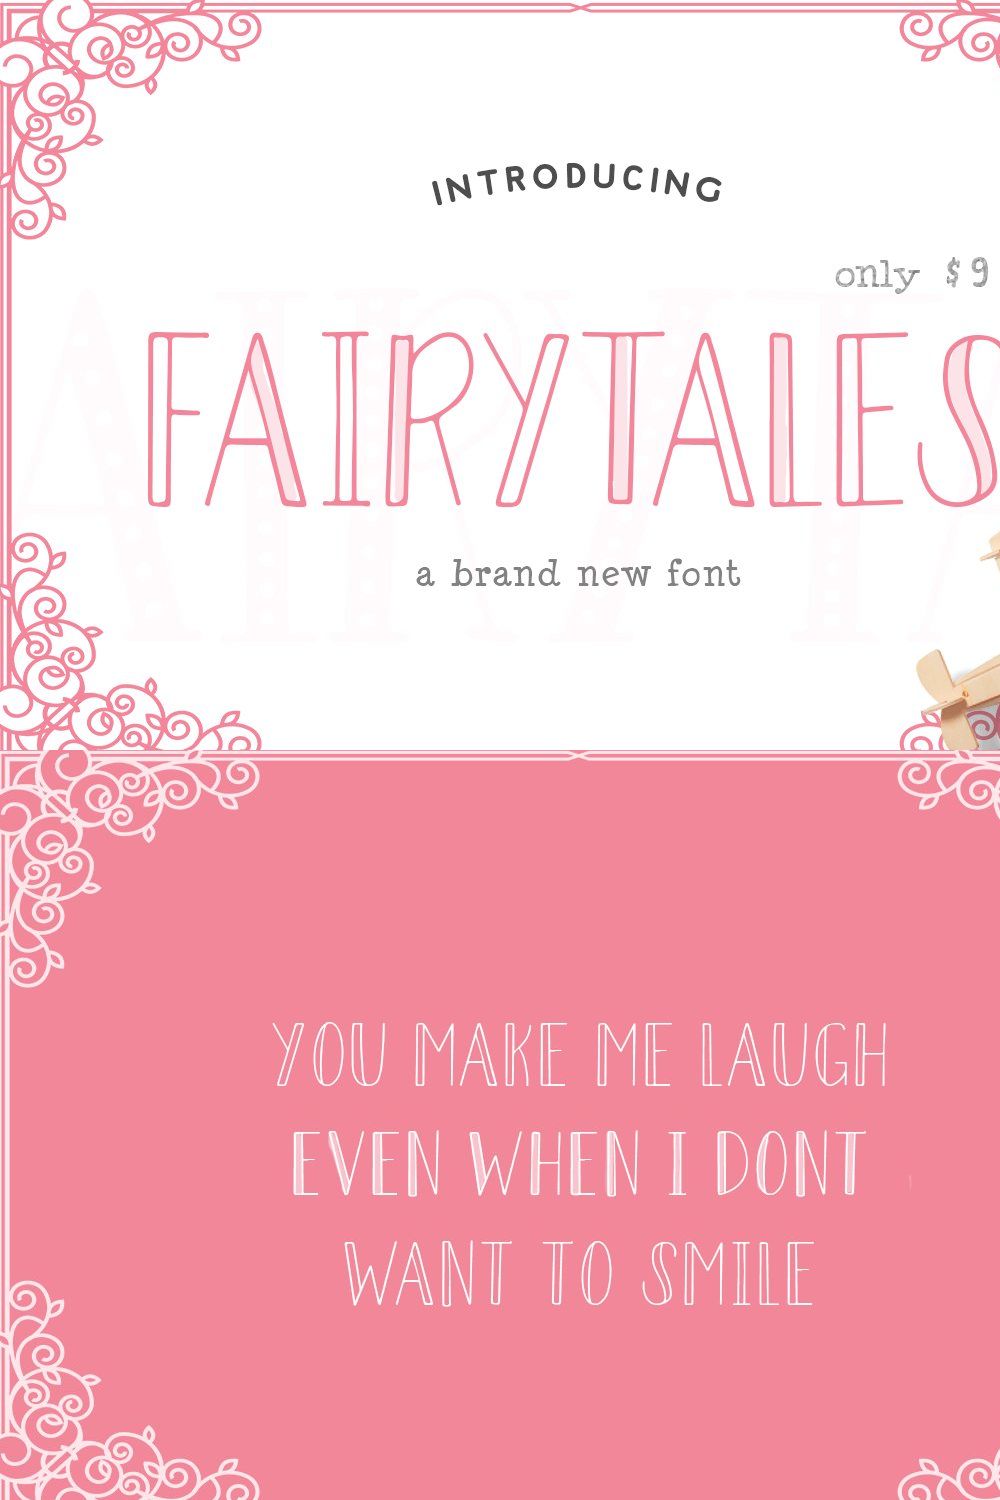 Fairytales Font (Only $9) pinterest preview image.